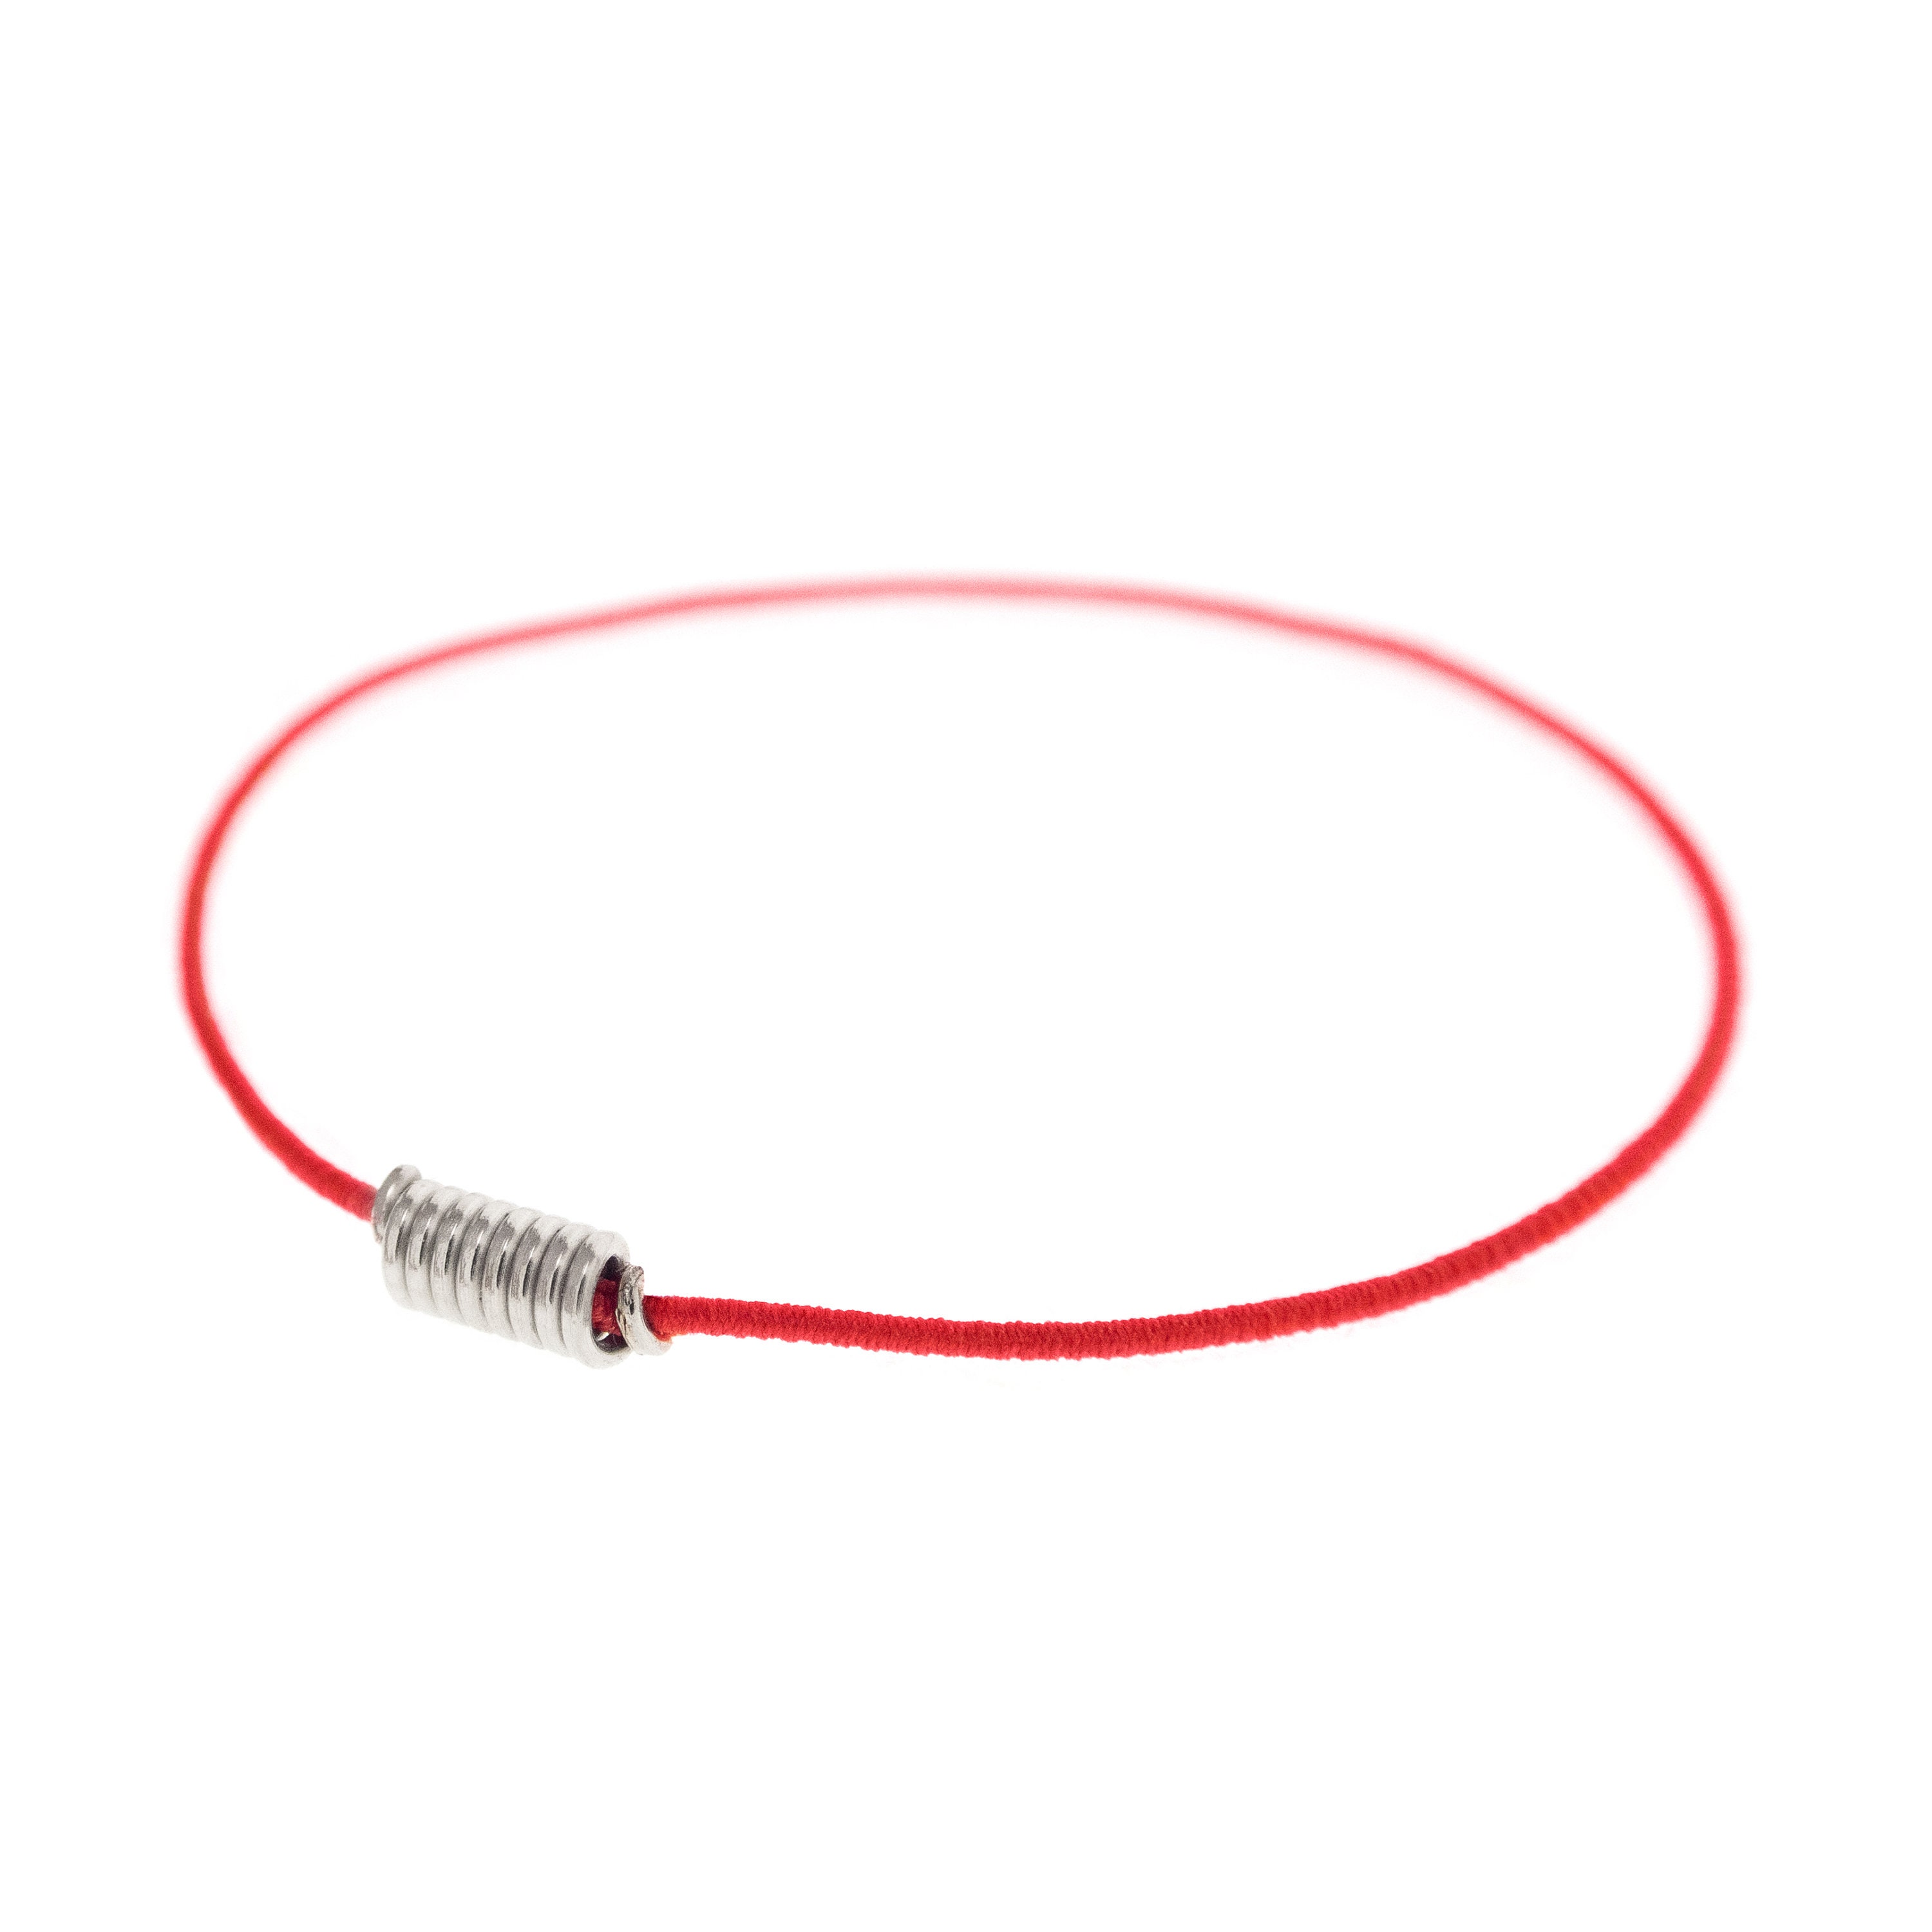 Red String Bracelets: What's the Jewish Significance? | My Jewish Learning